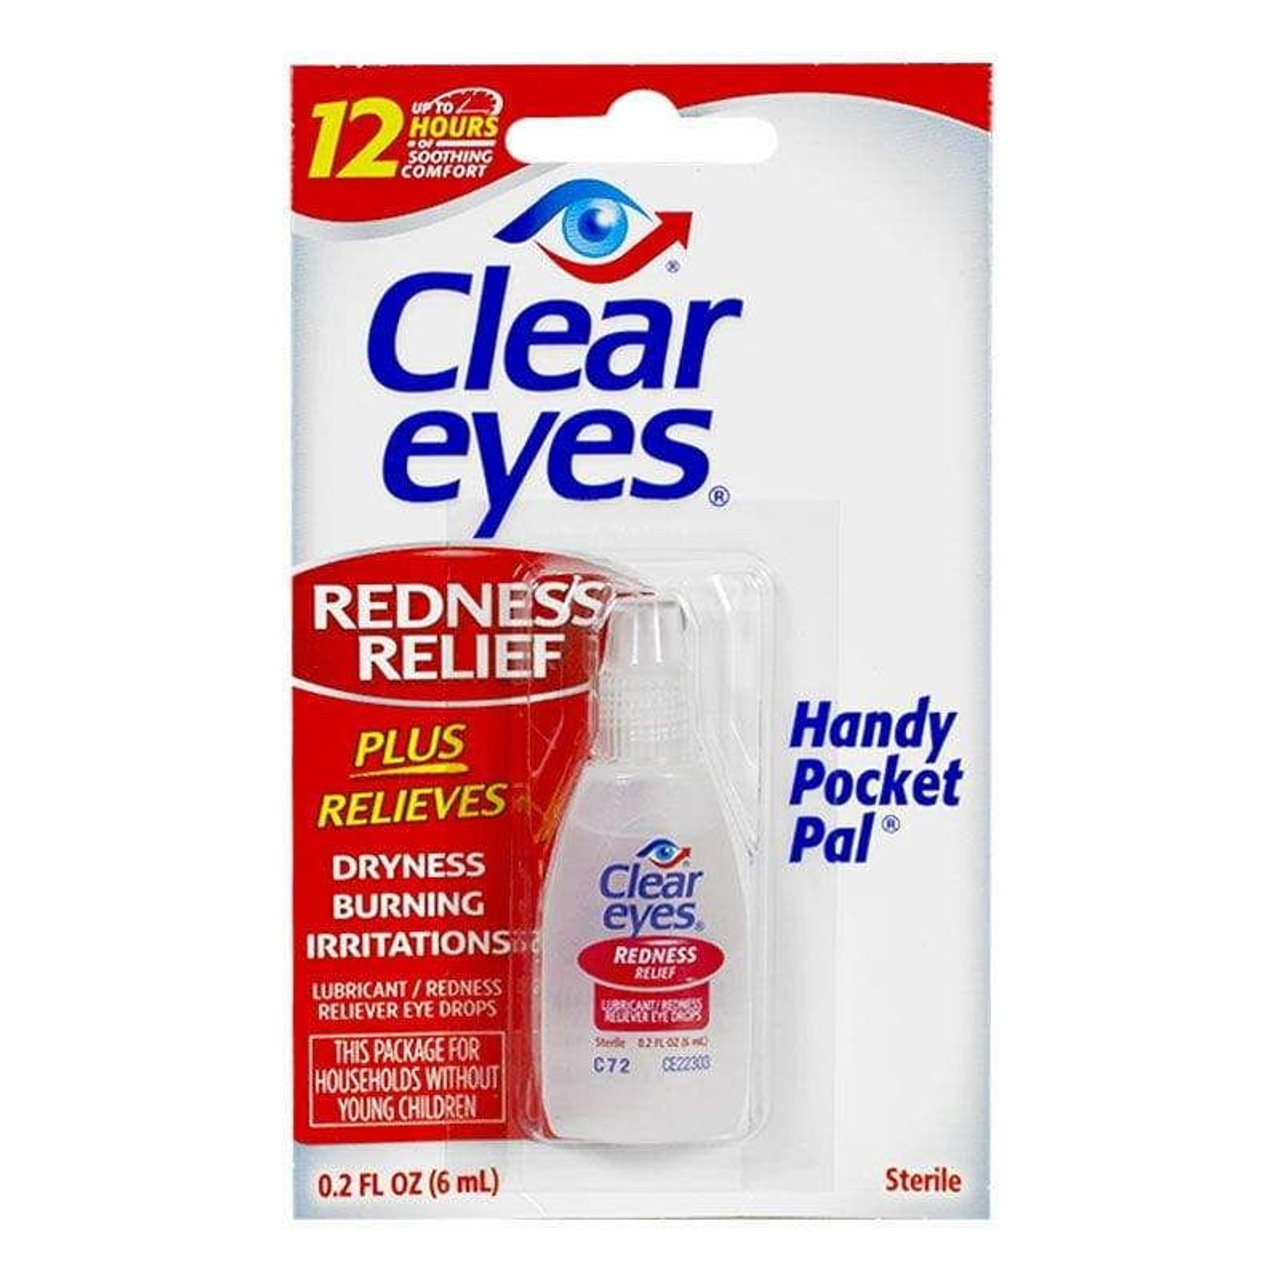 golf lindre Tag fat CLEAR EYES REDNESS RELIEF